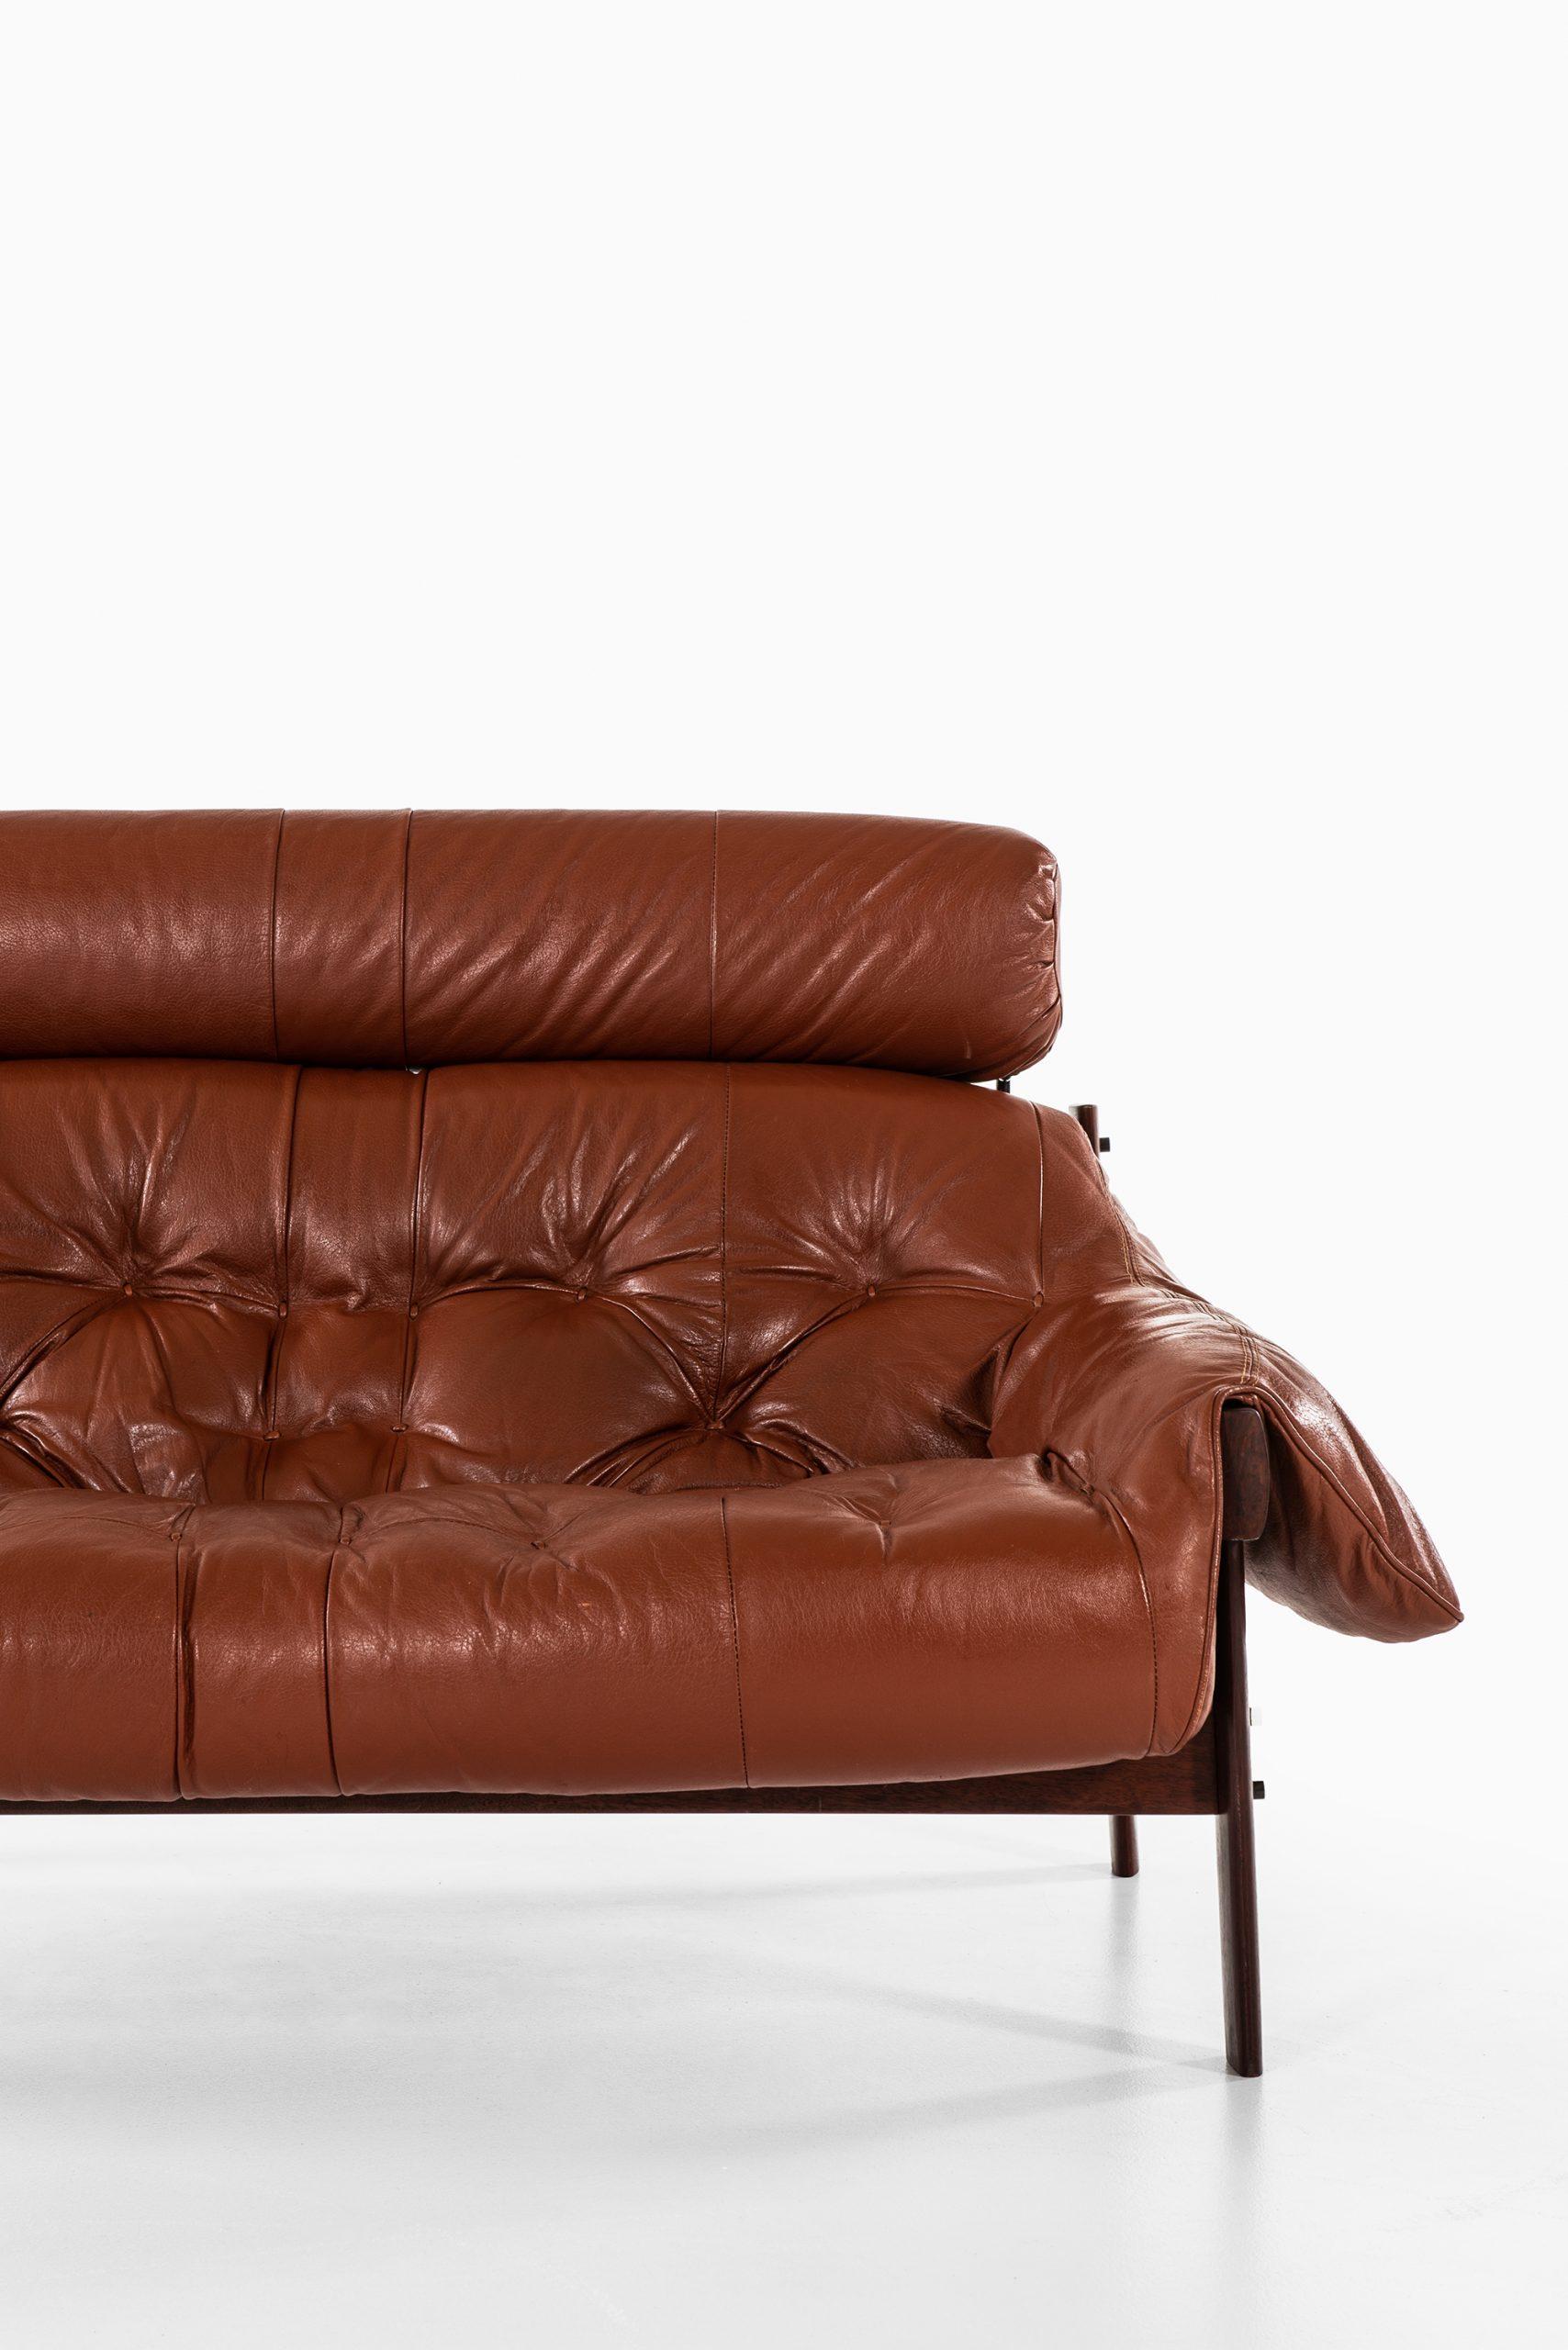 Rare 2-seat sofa designed by Percival Lafer. Produced by Lafer MP in Brazil.